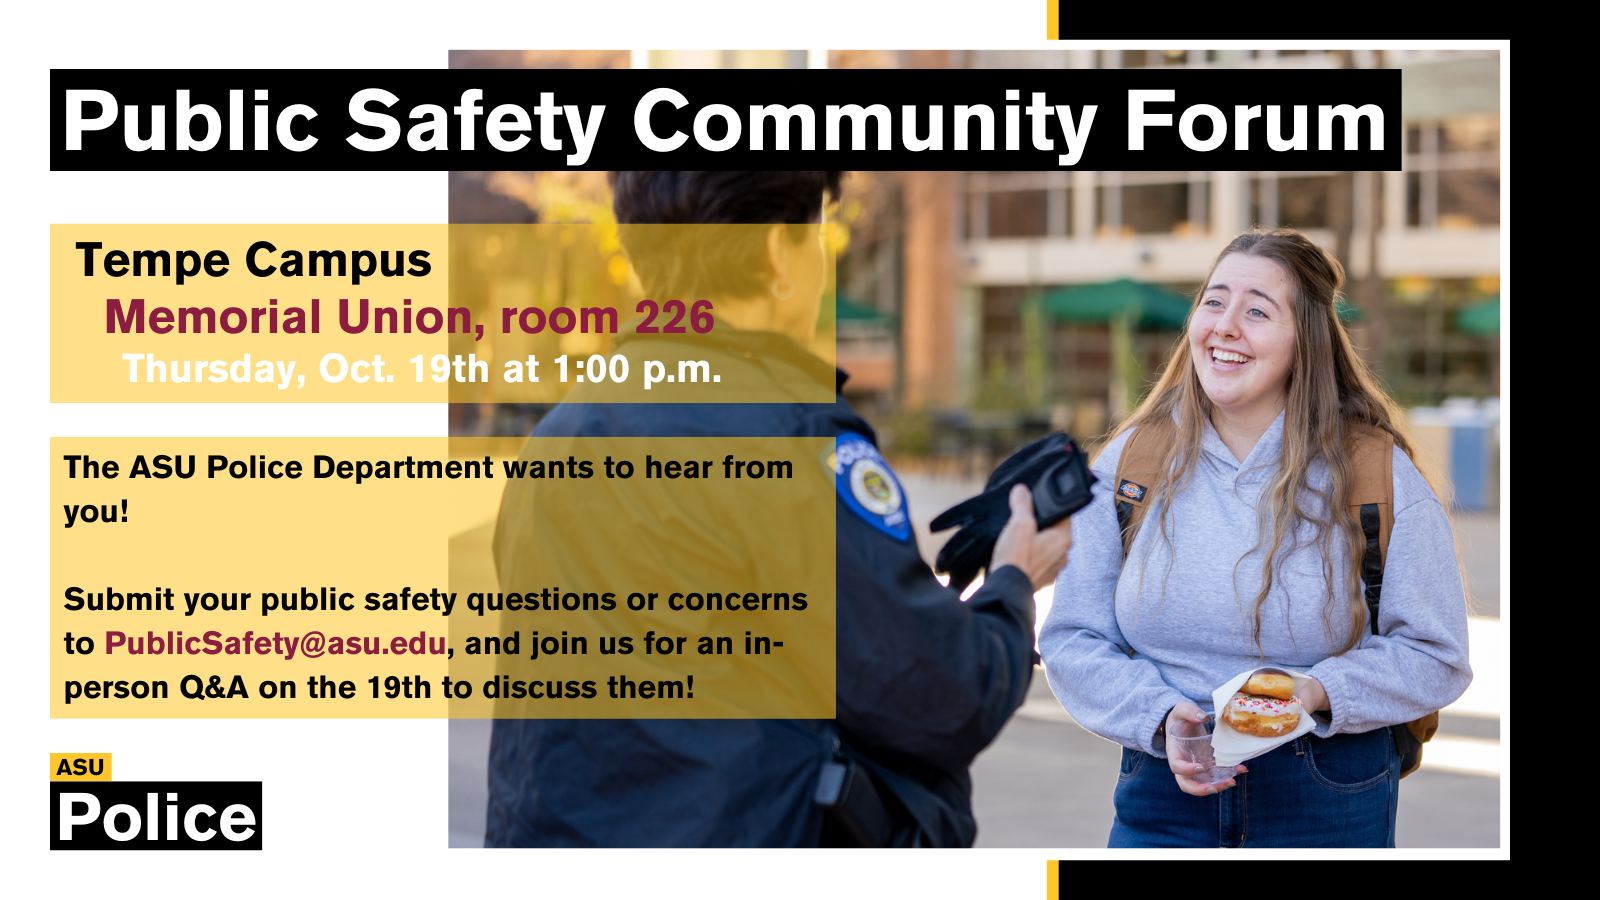 Flyer for Public Safety Community Form showing location at MU on October 19